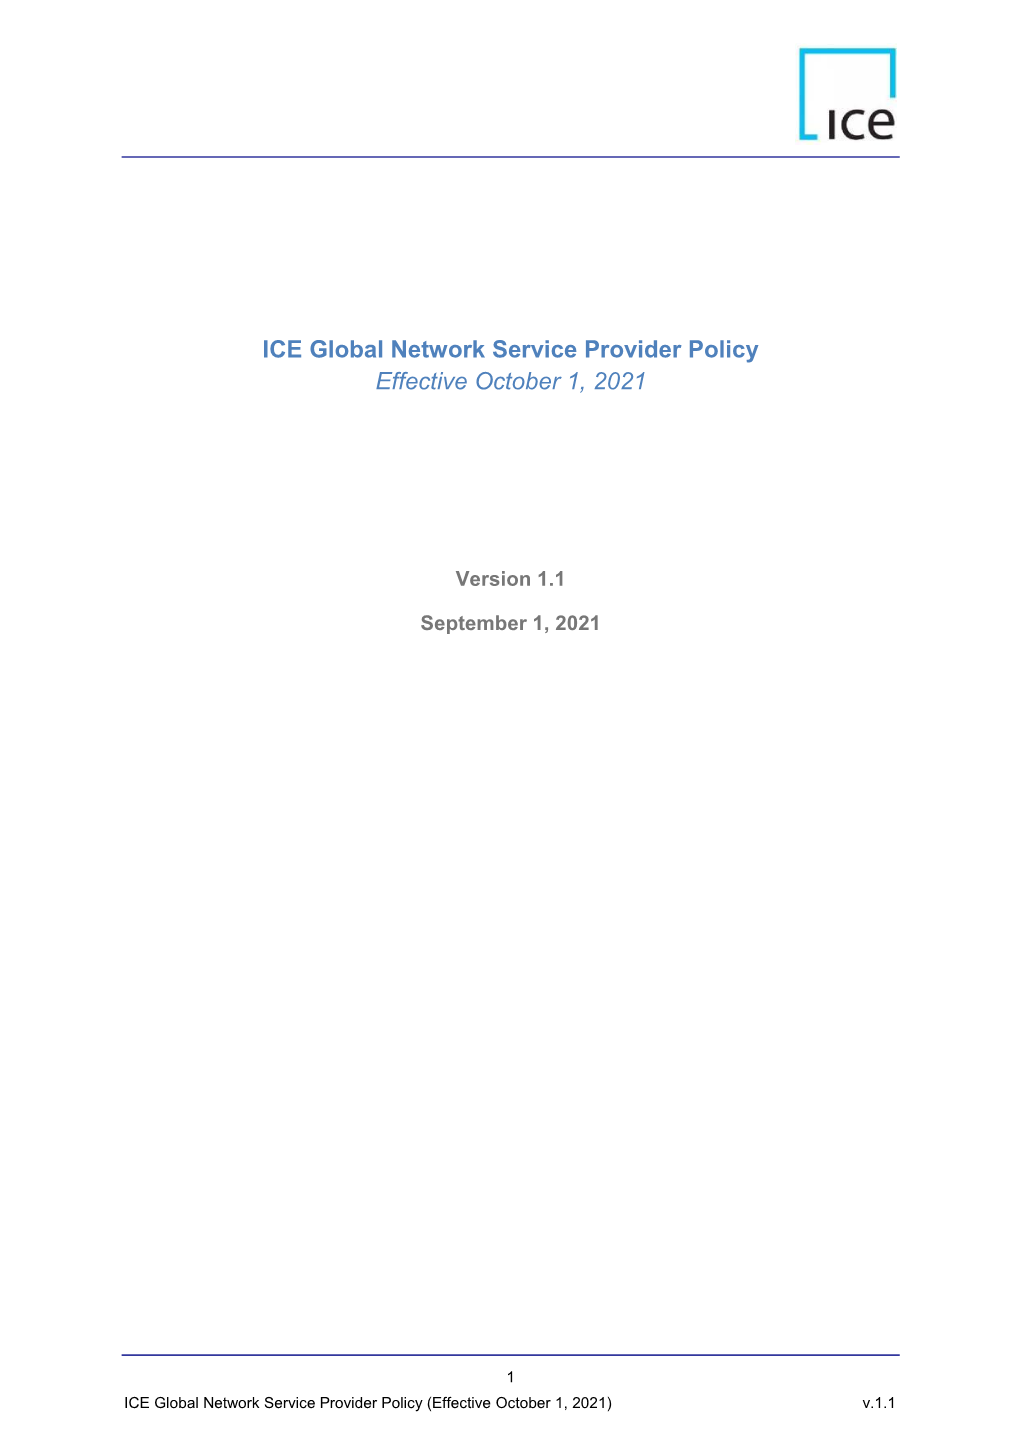 ICE Global Network Service Provider Policy Effective October 1, 2021